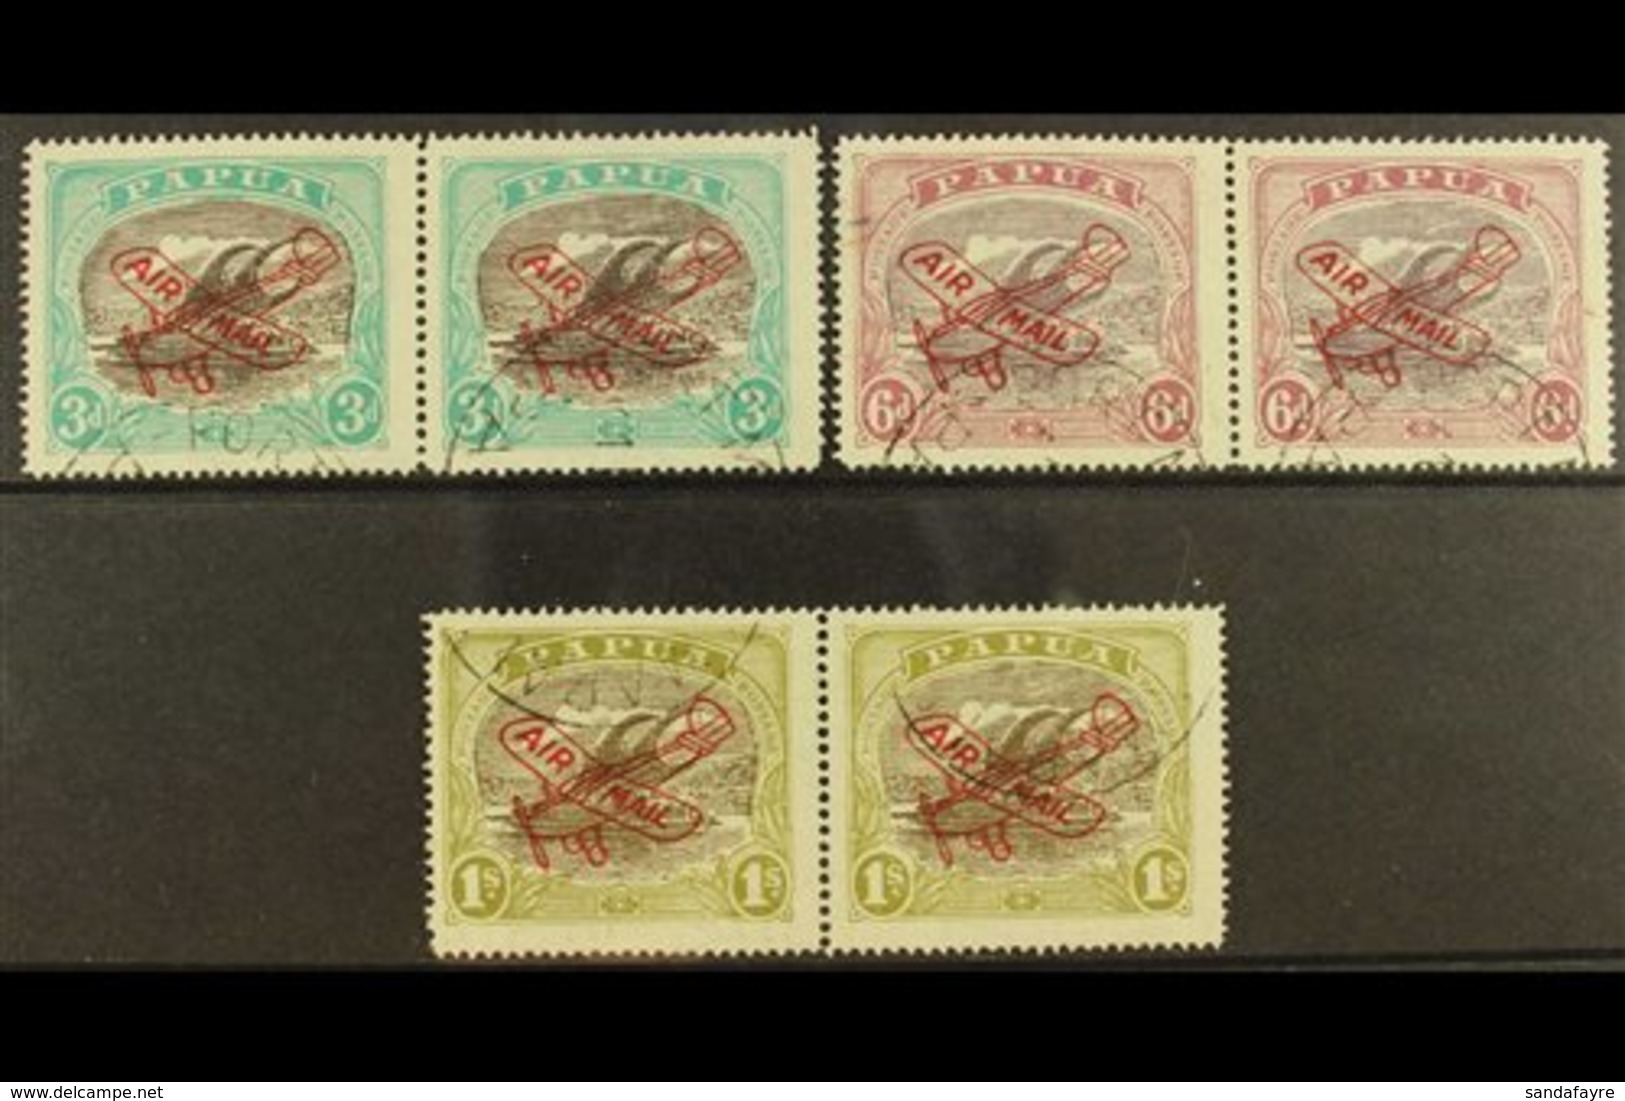 1930 Air Set, Ash Printing, SG 118-120, Each In A Horizontal Pair With One In Each Showing RIFT IN CLOUD, Fine Cds Used. - Papouasie-Nouvelle-Guinée